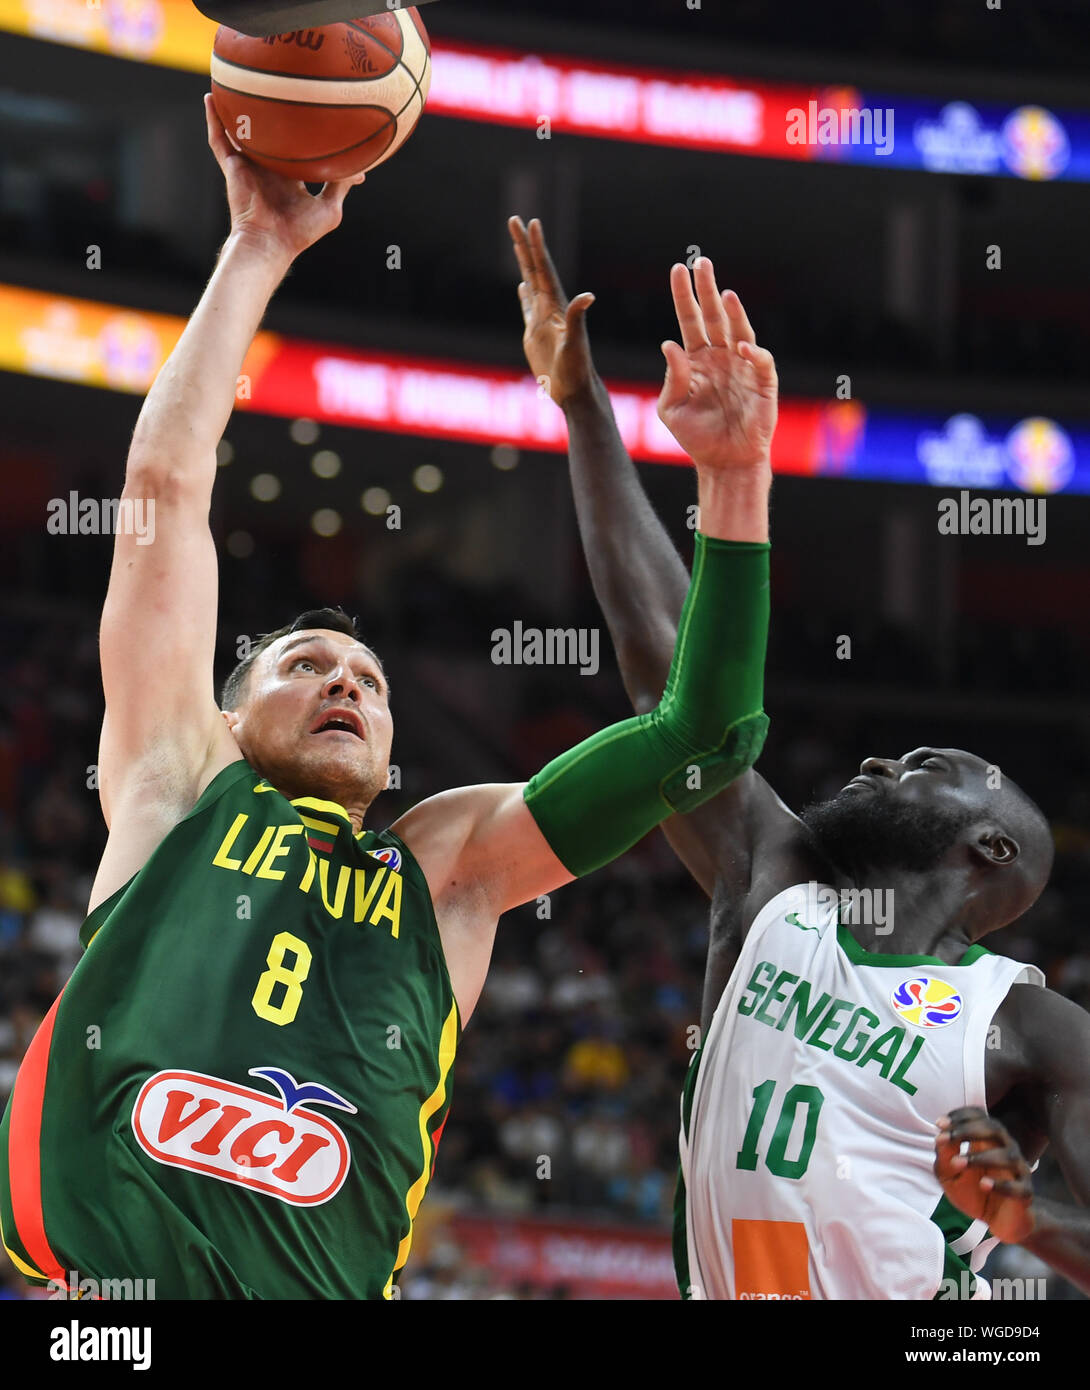 Dongguan. 1st Sep, 2019. Jonas Maciulis (L) of Lithuania goes for the basket during the group H match between Lithuania and Senegal at the 2019 FIBA World Cup in Donggguan, south China's Guangdong Province, Sept.1, 2019. Credit: Deng Hua/Xinhua/Alamy Live News Stock Photo